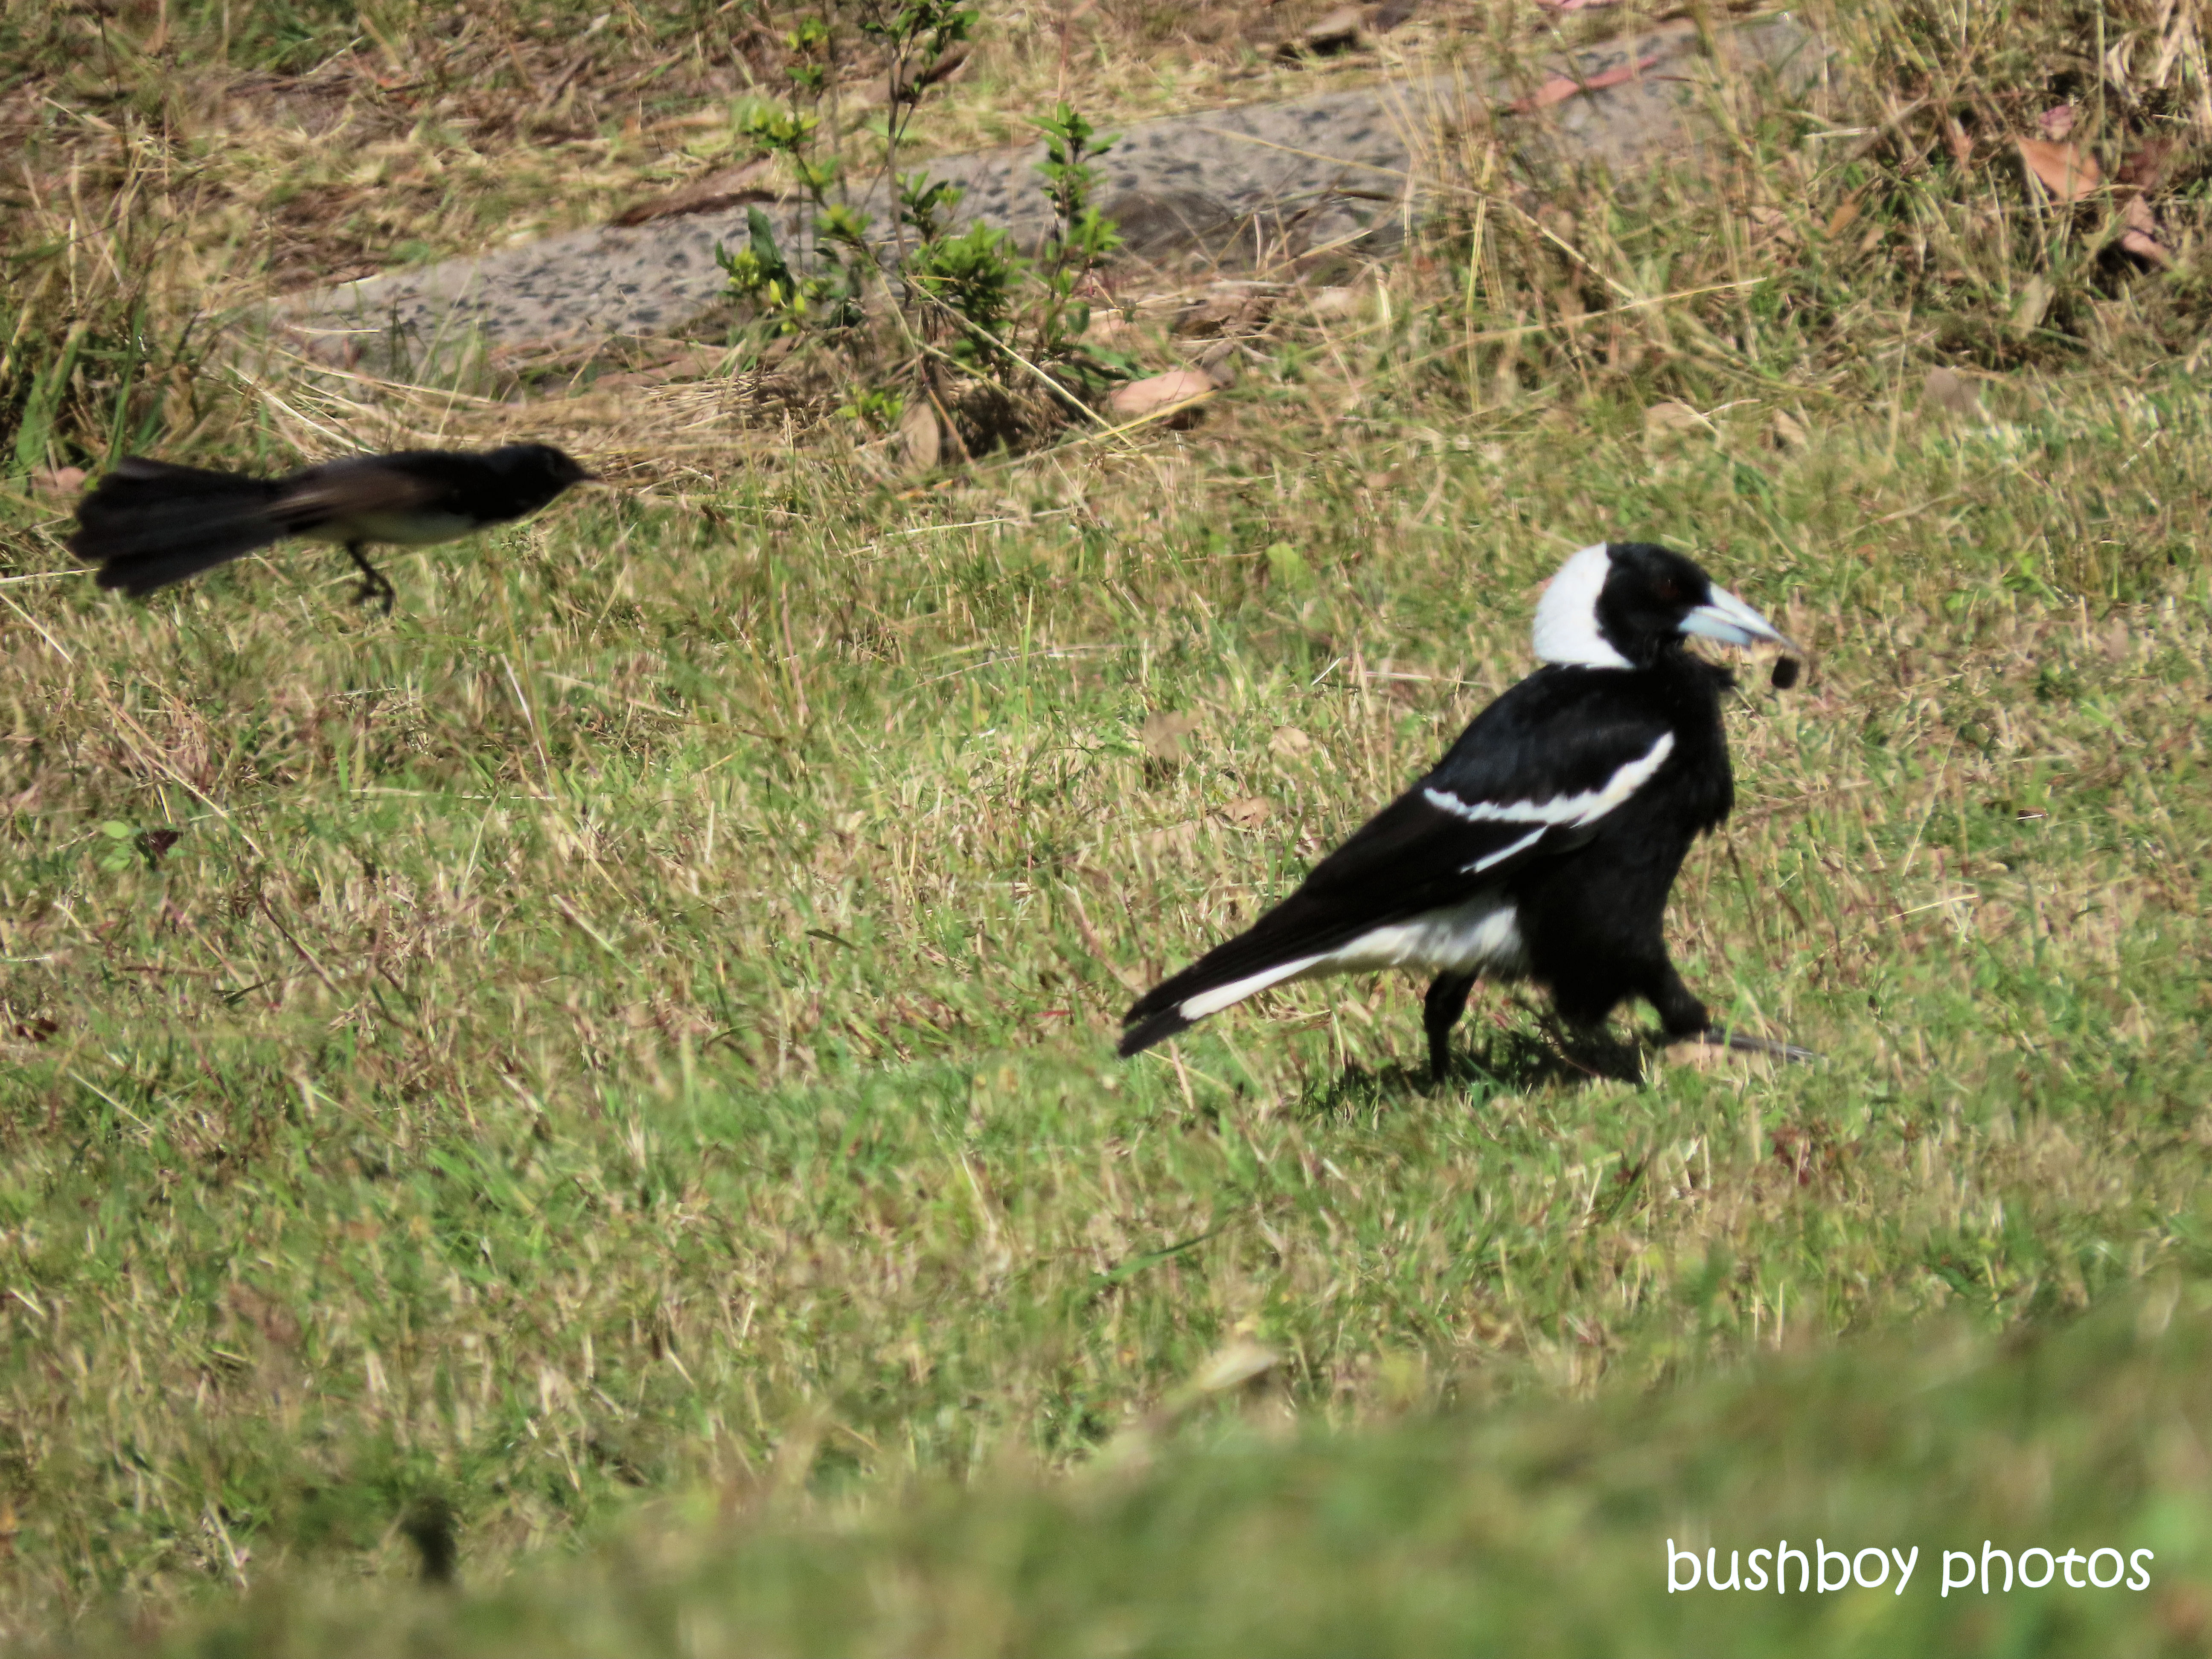 magpie_willie_wagtail_attack1_named_caniaba_august 2019